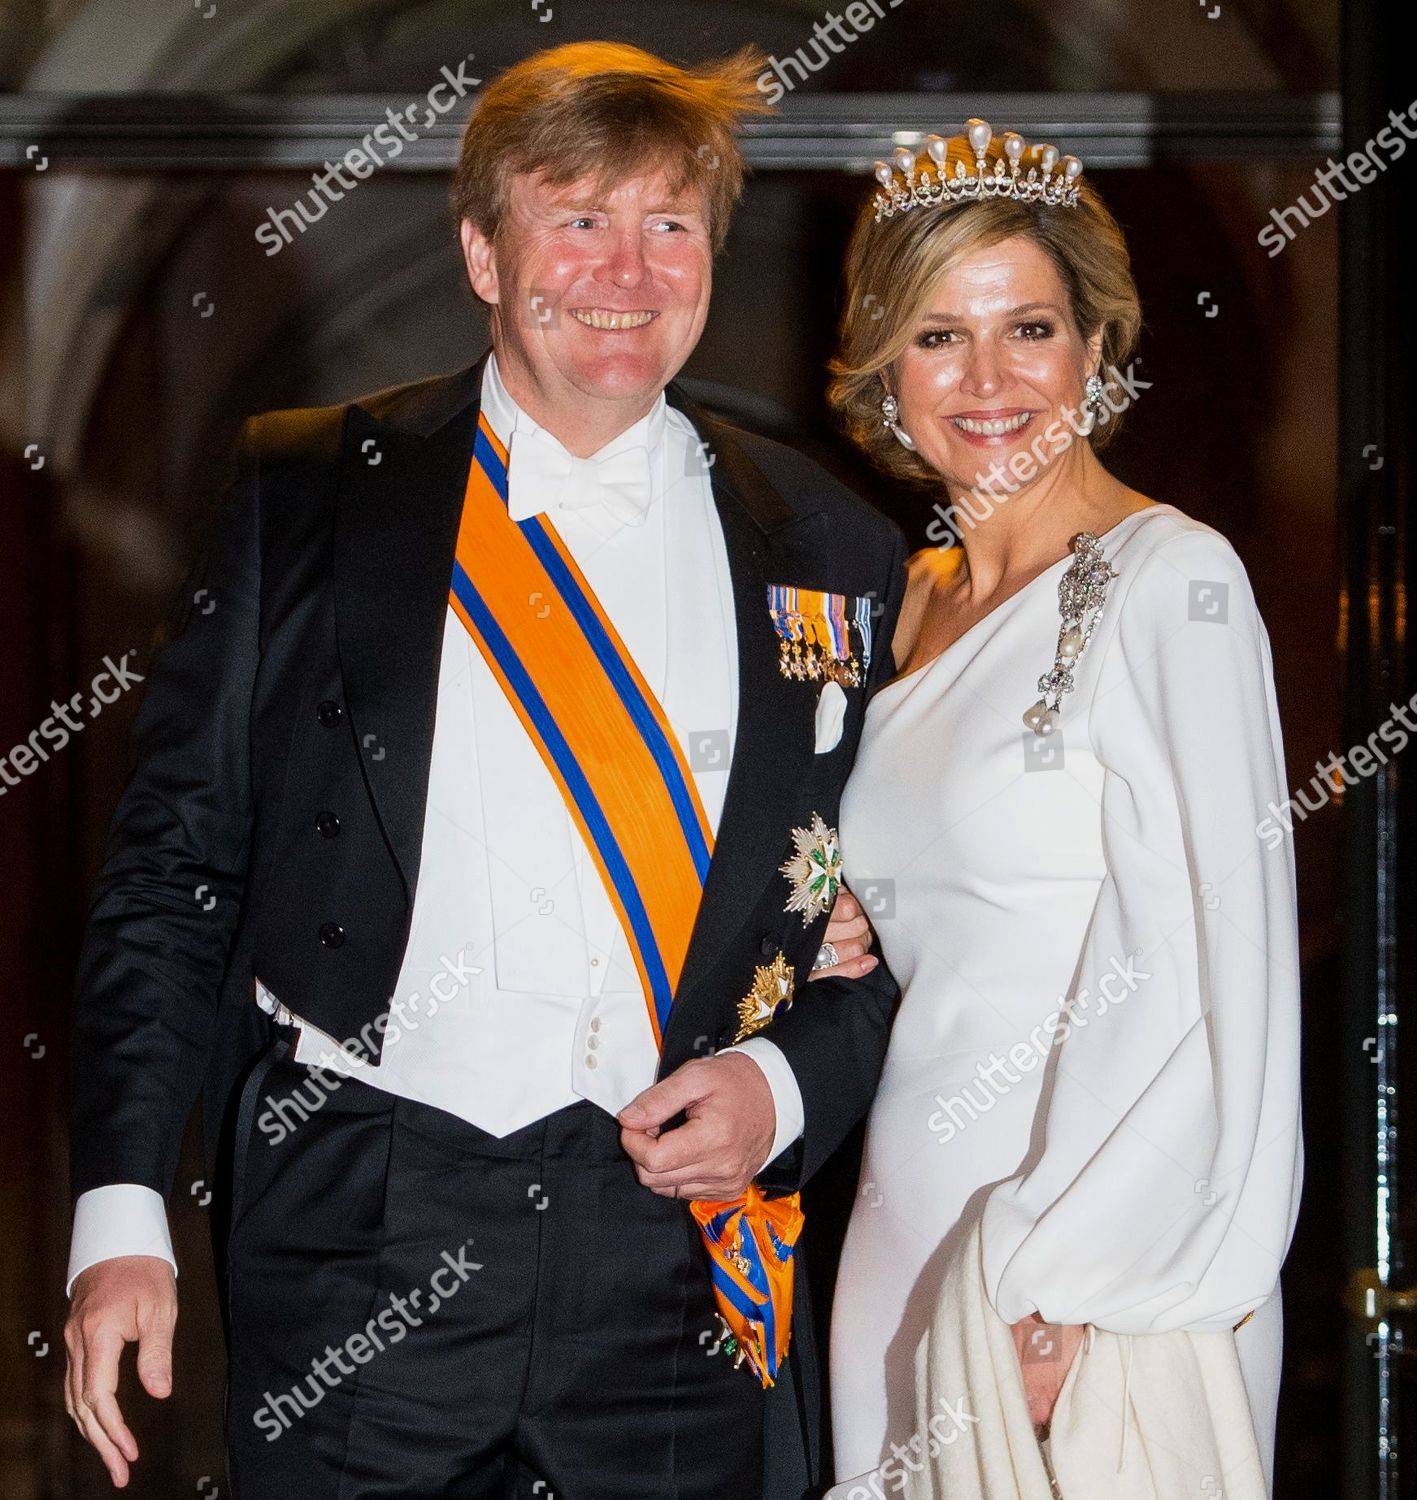 dinner-for-the-diplomatic-corps-at-the-royal-palace-amsterdam-the-netherlands-shutterstock-editorial-10195970r.jpg